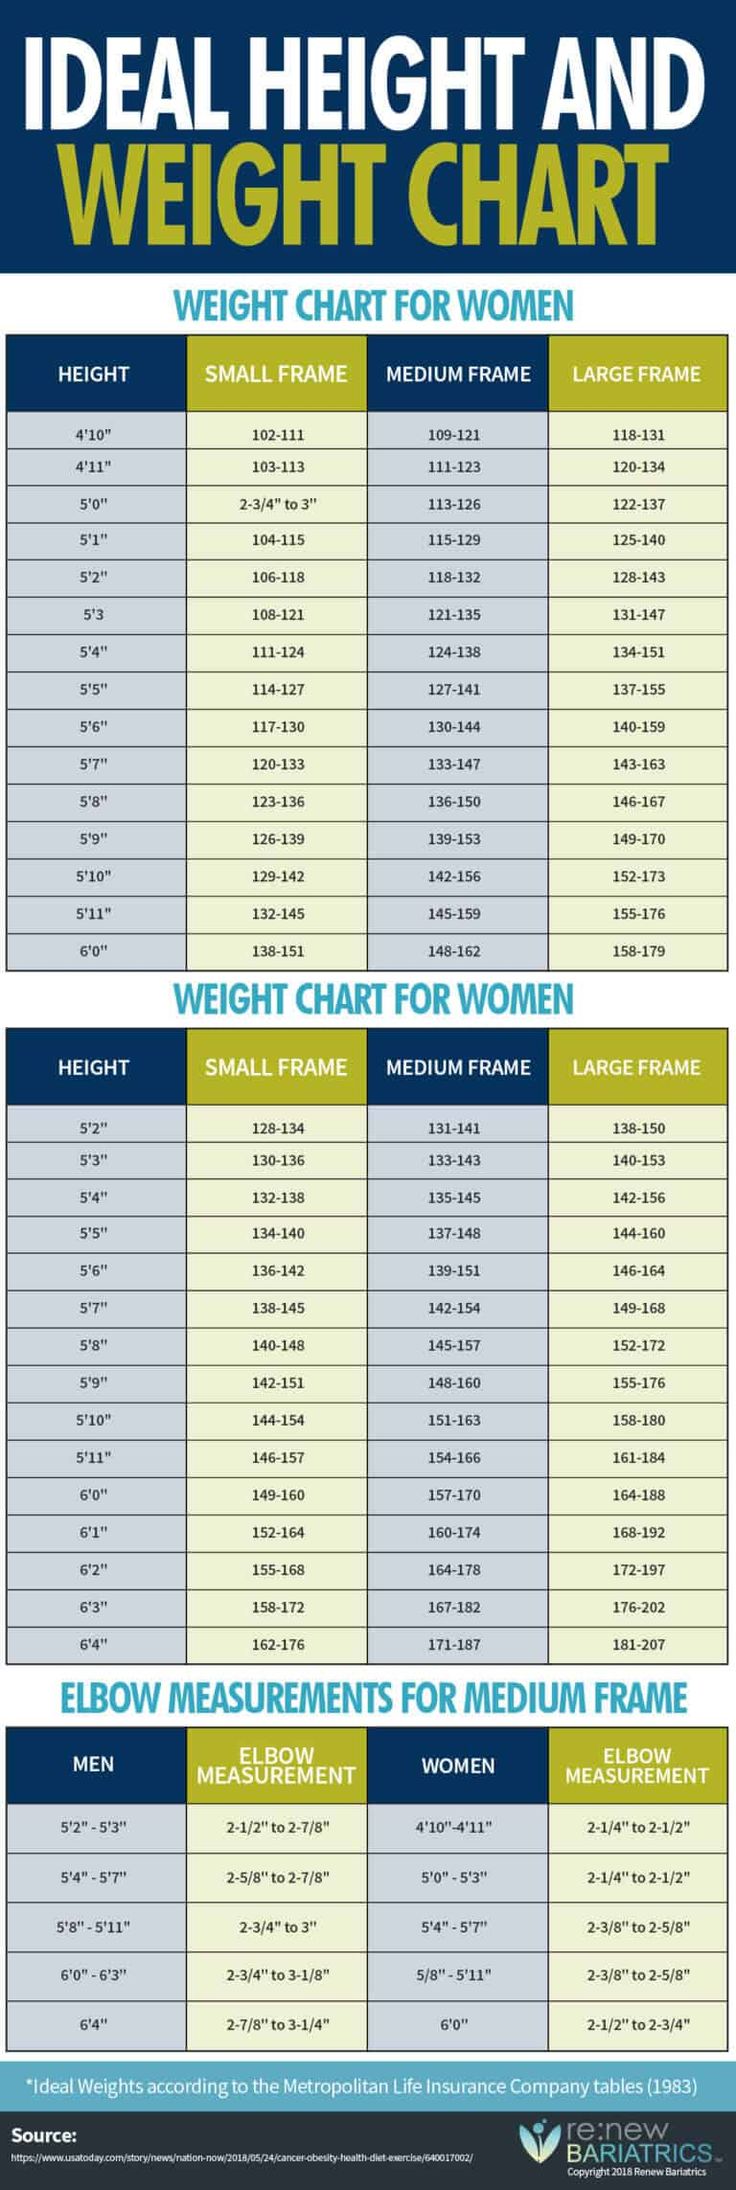 Healthy Weight For Height And Body Type